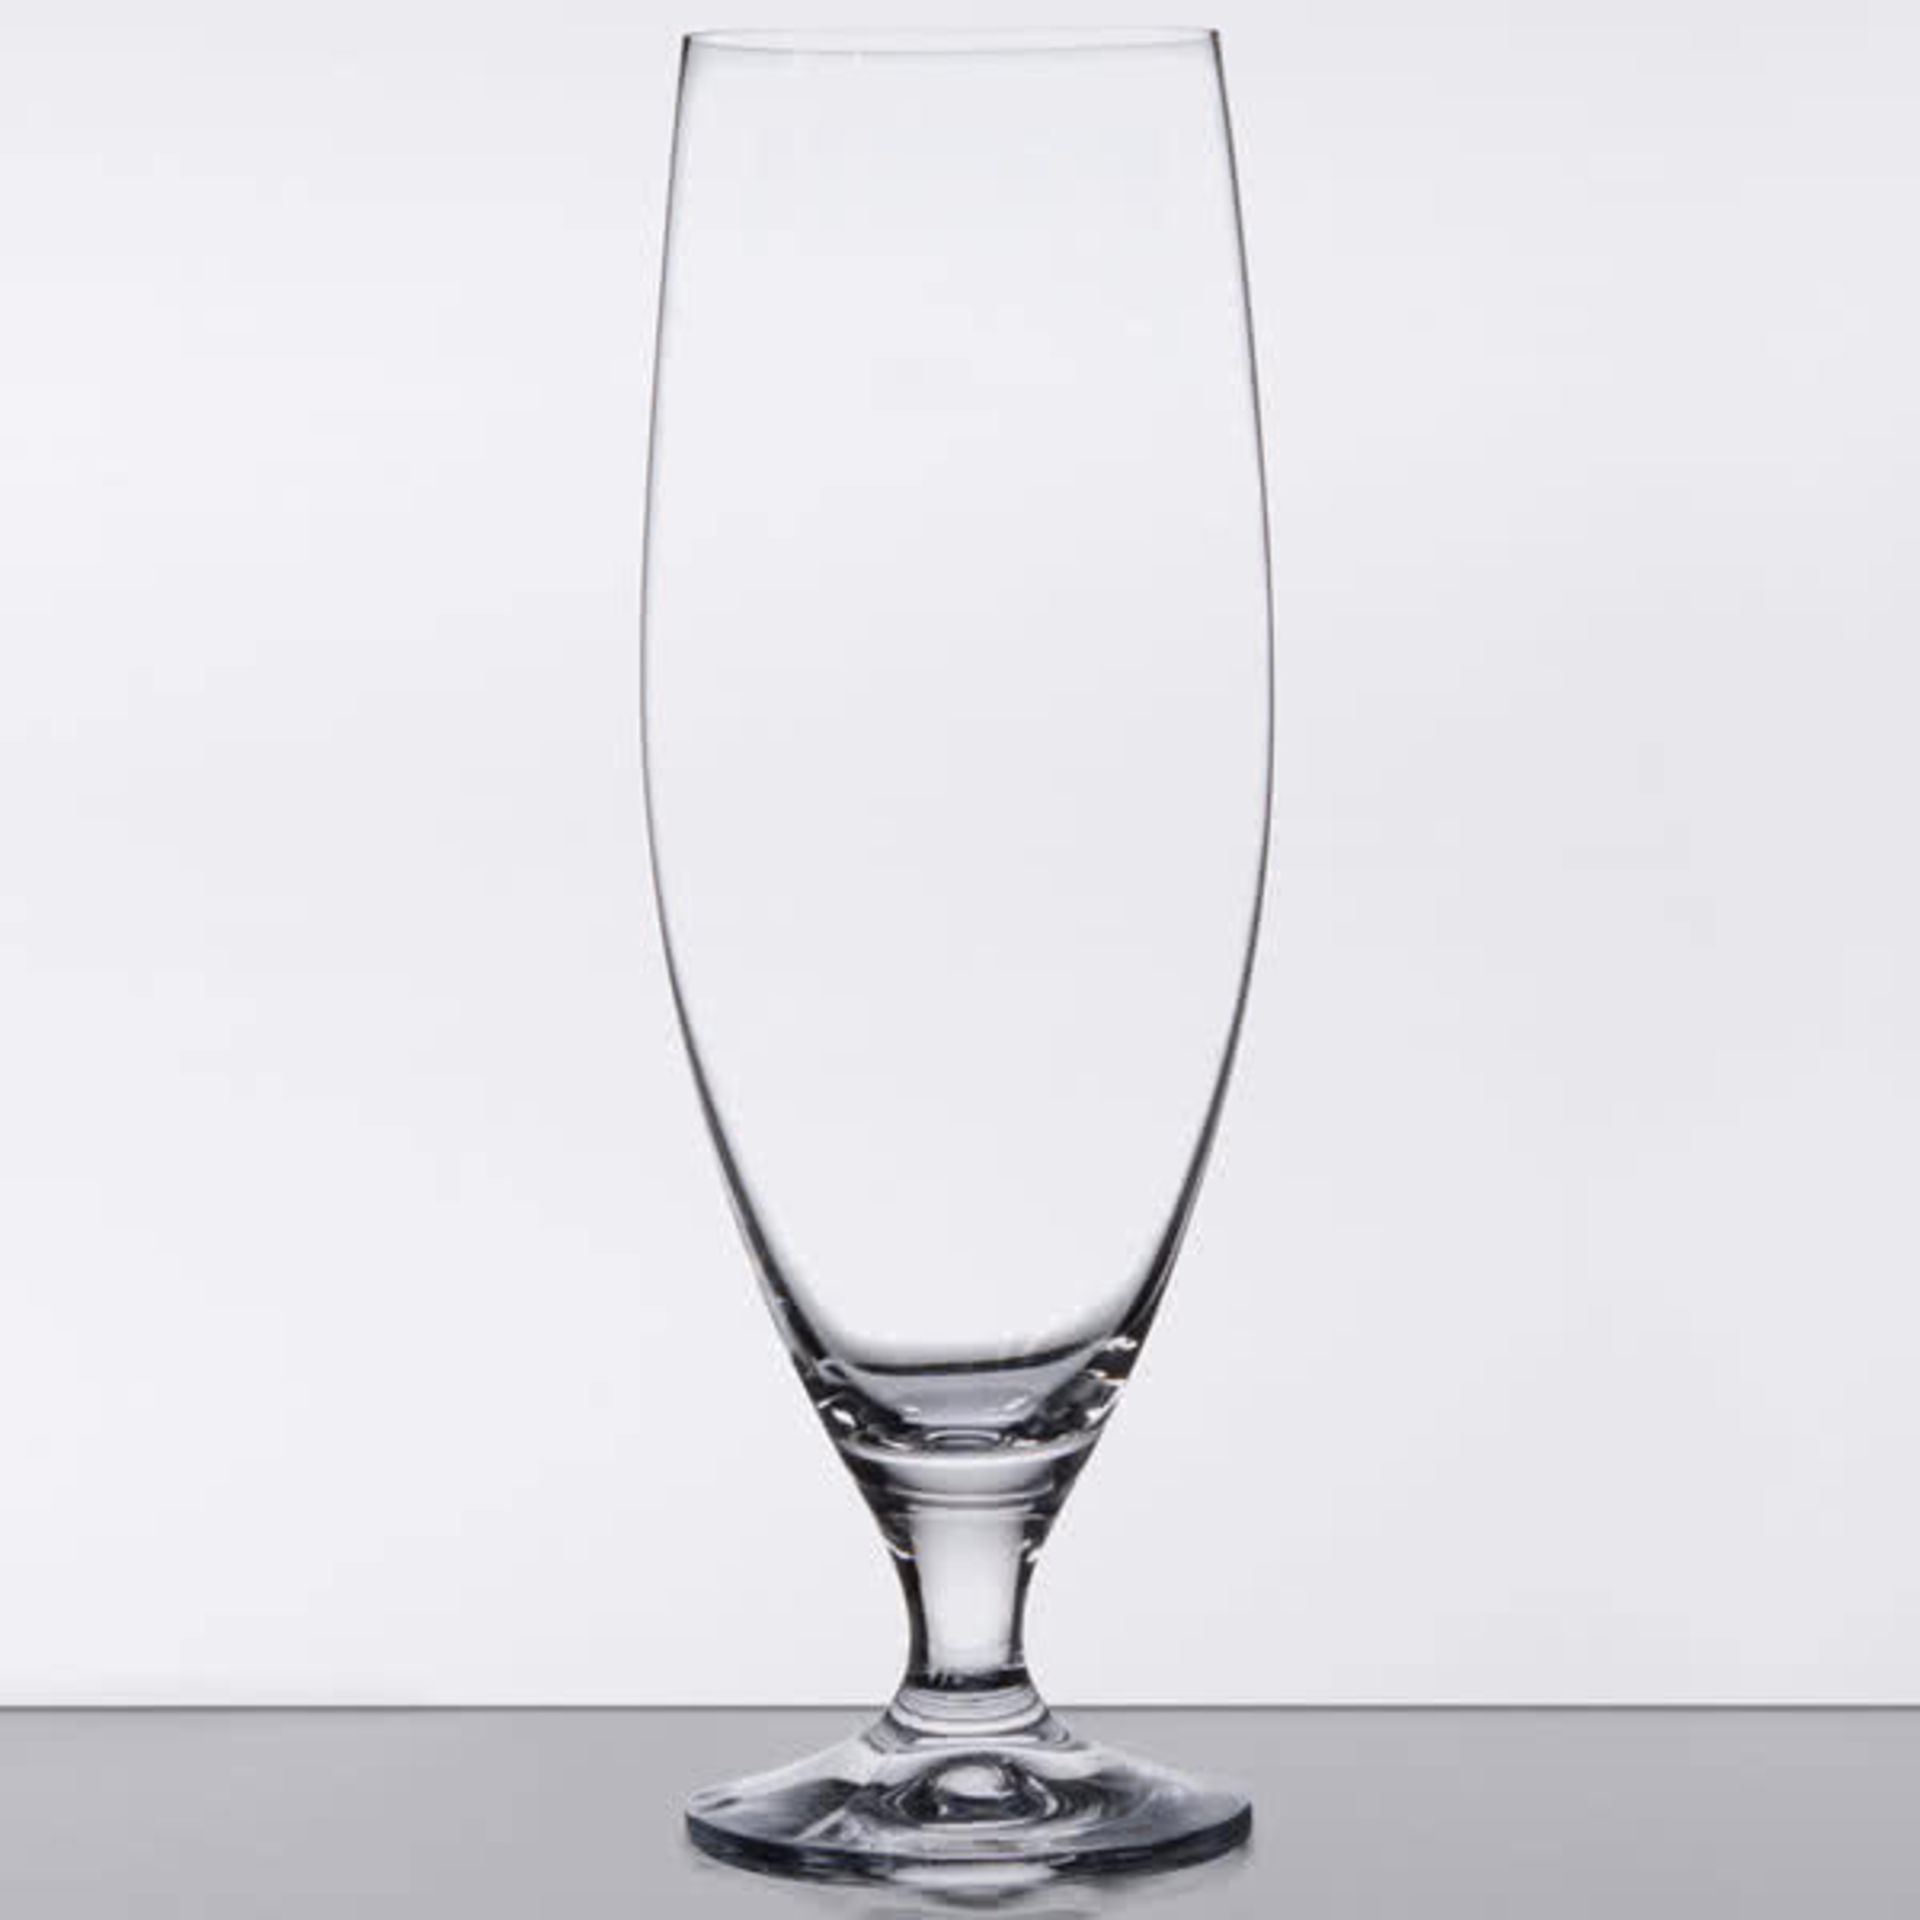 New Stolzle F1718T Footed Beer Glass, Tall, 21-3/4 oz, 2 dz per case